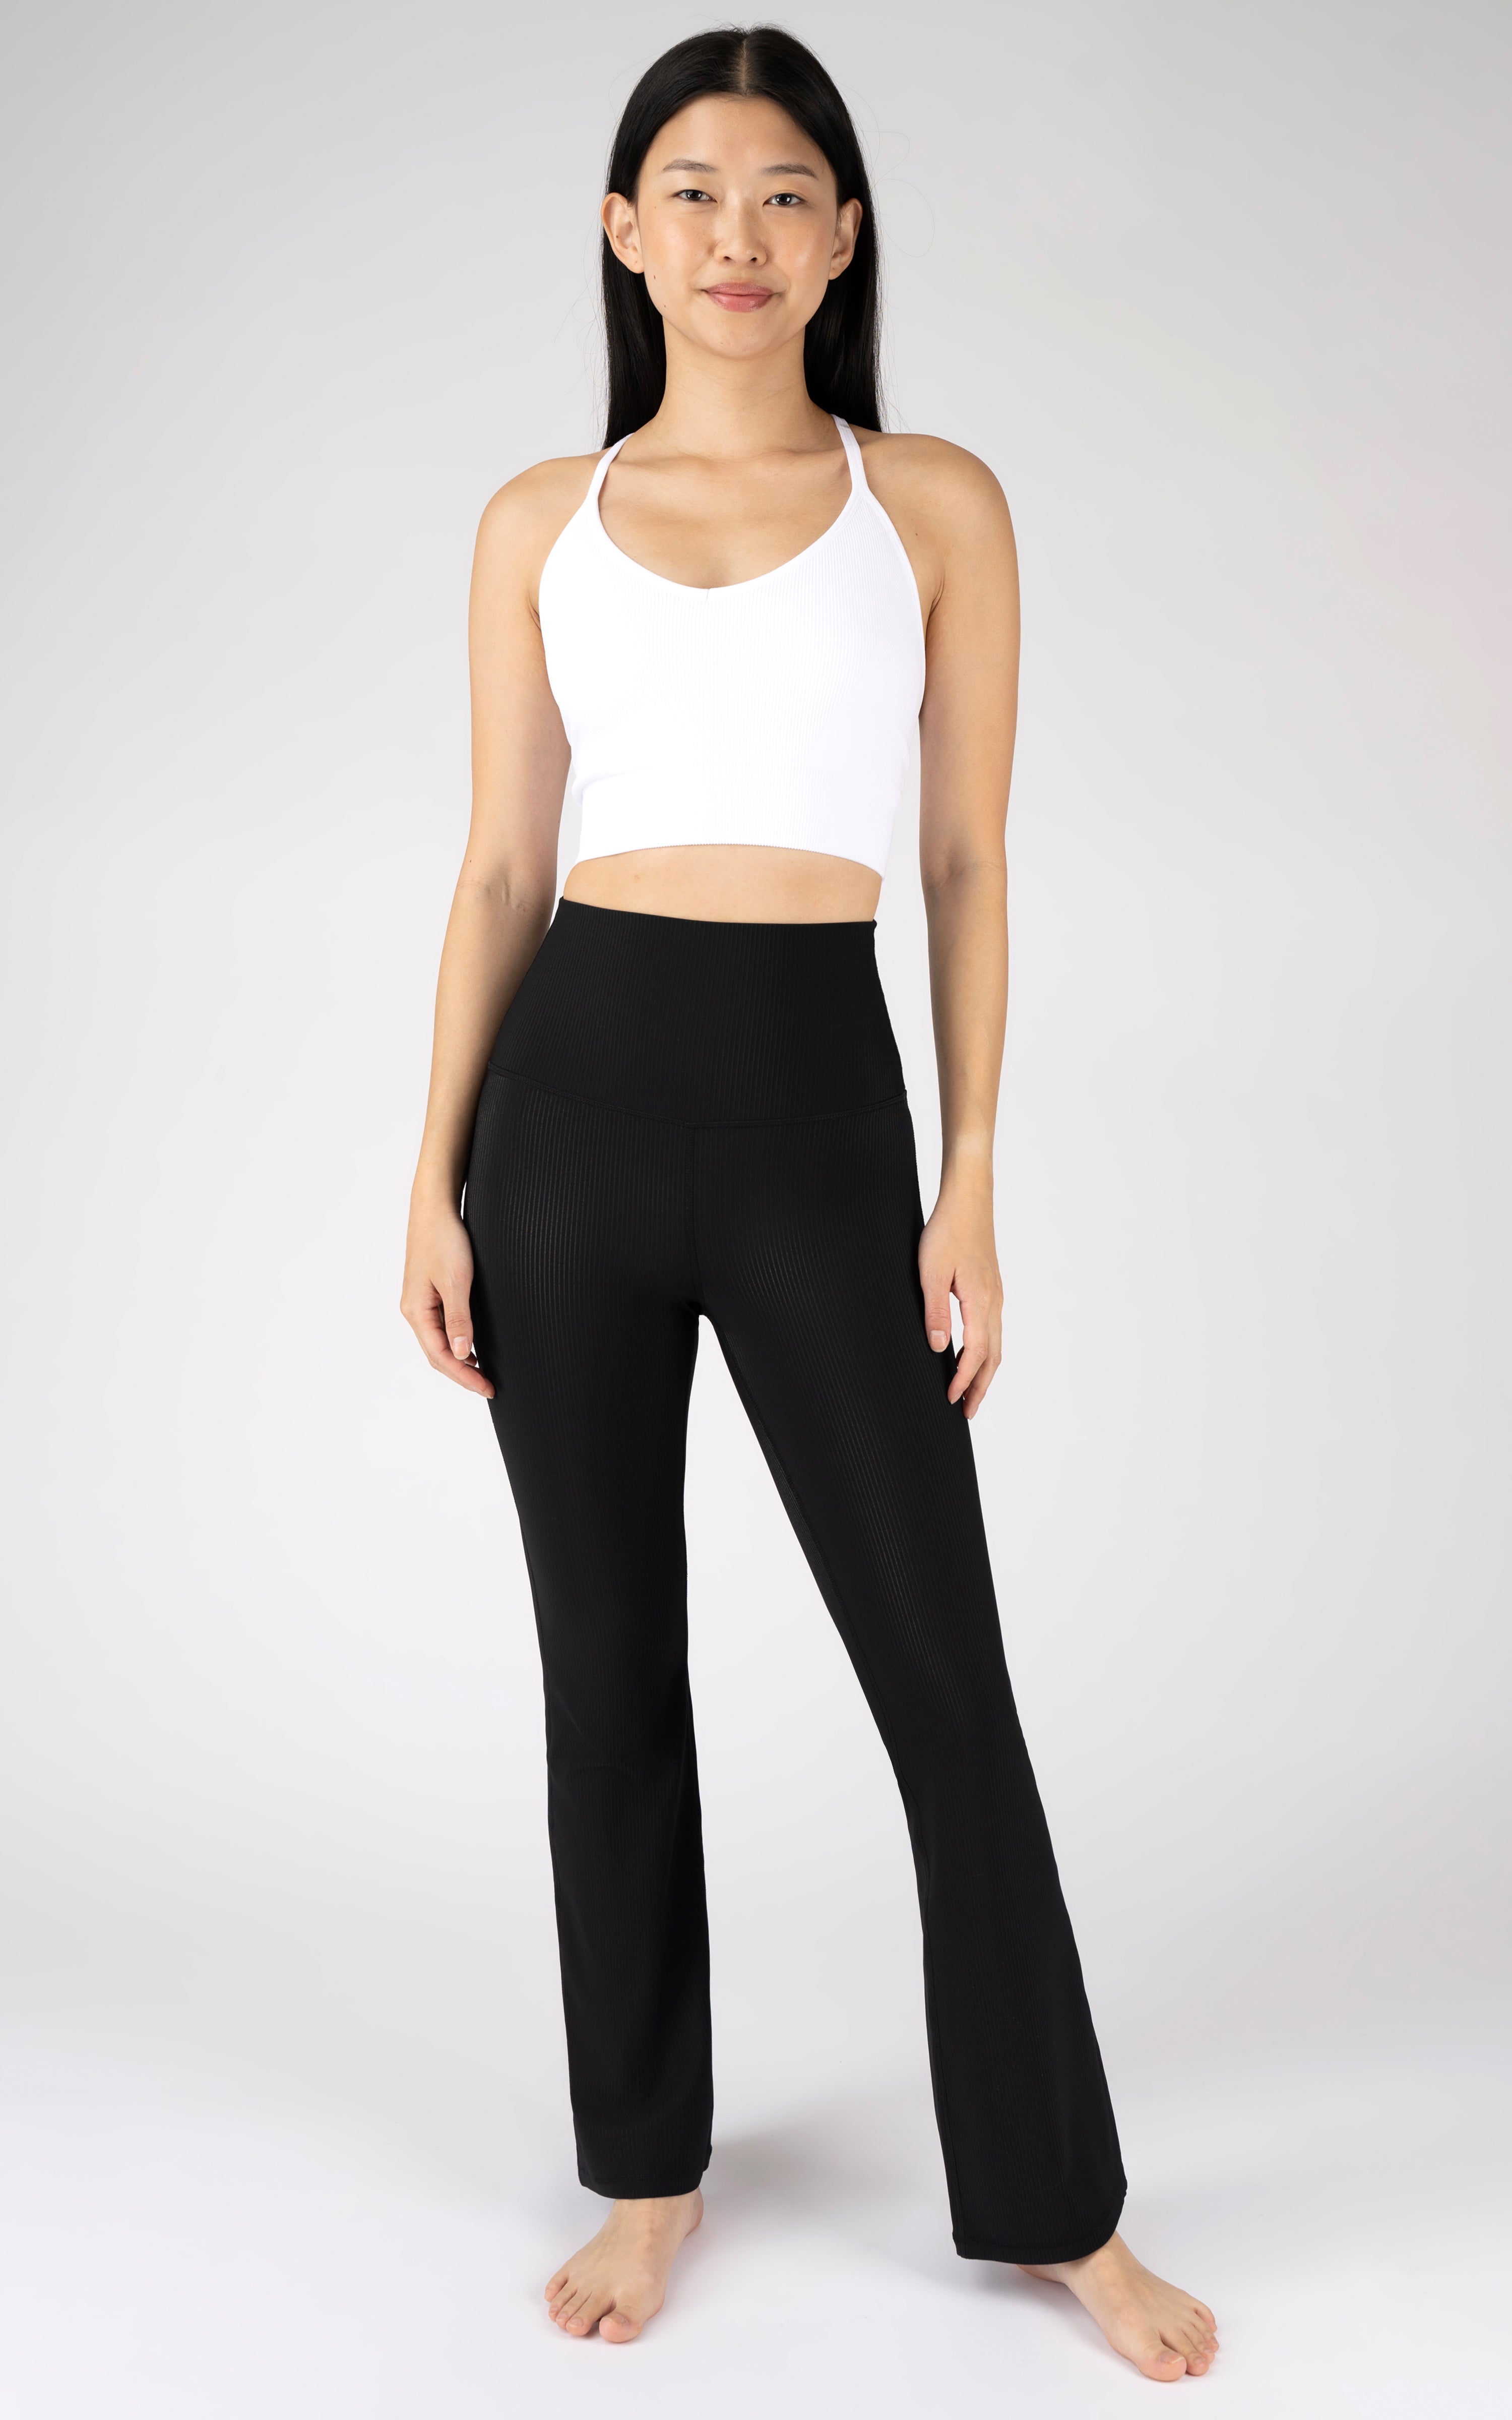 90 Degree By Reflex, Pants & Jumpsuits, 9 Degrees By Reflex Pull On  Cropped Workout Legging S